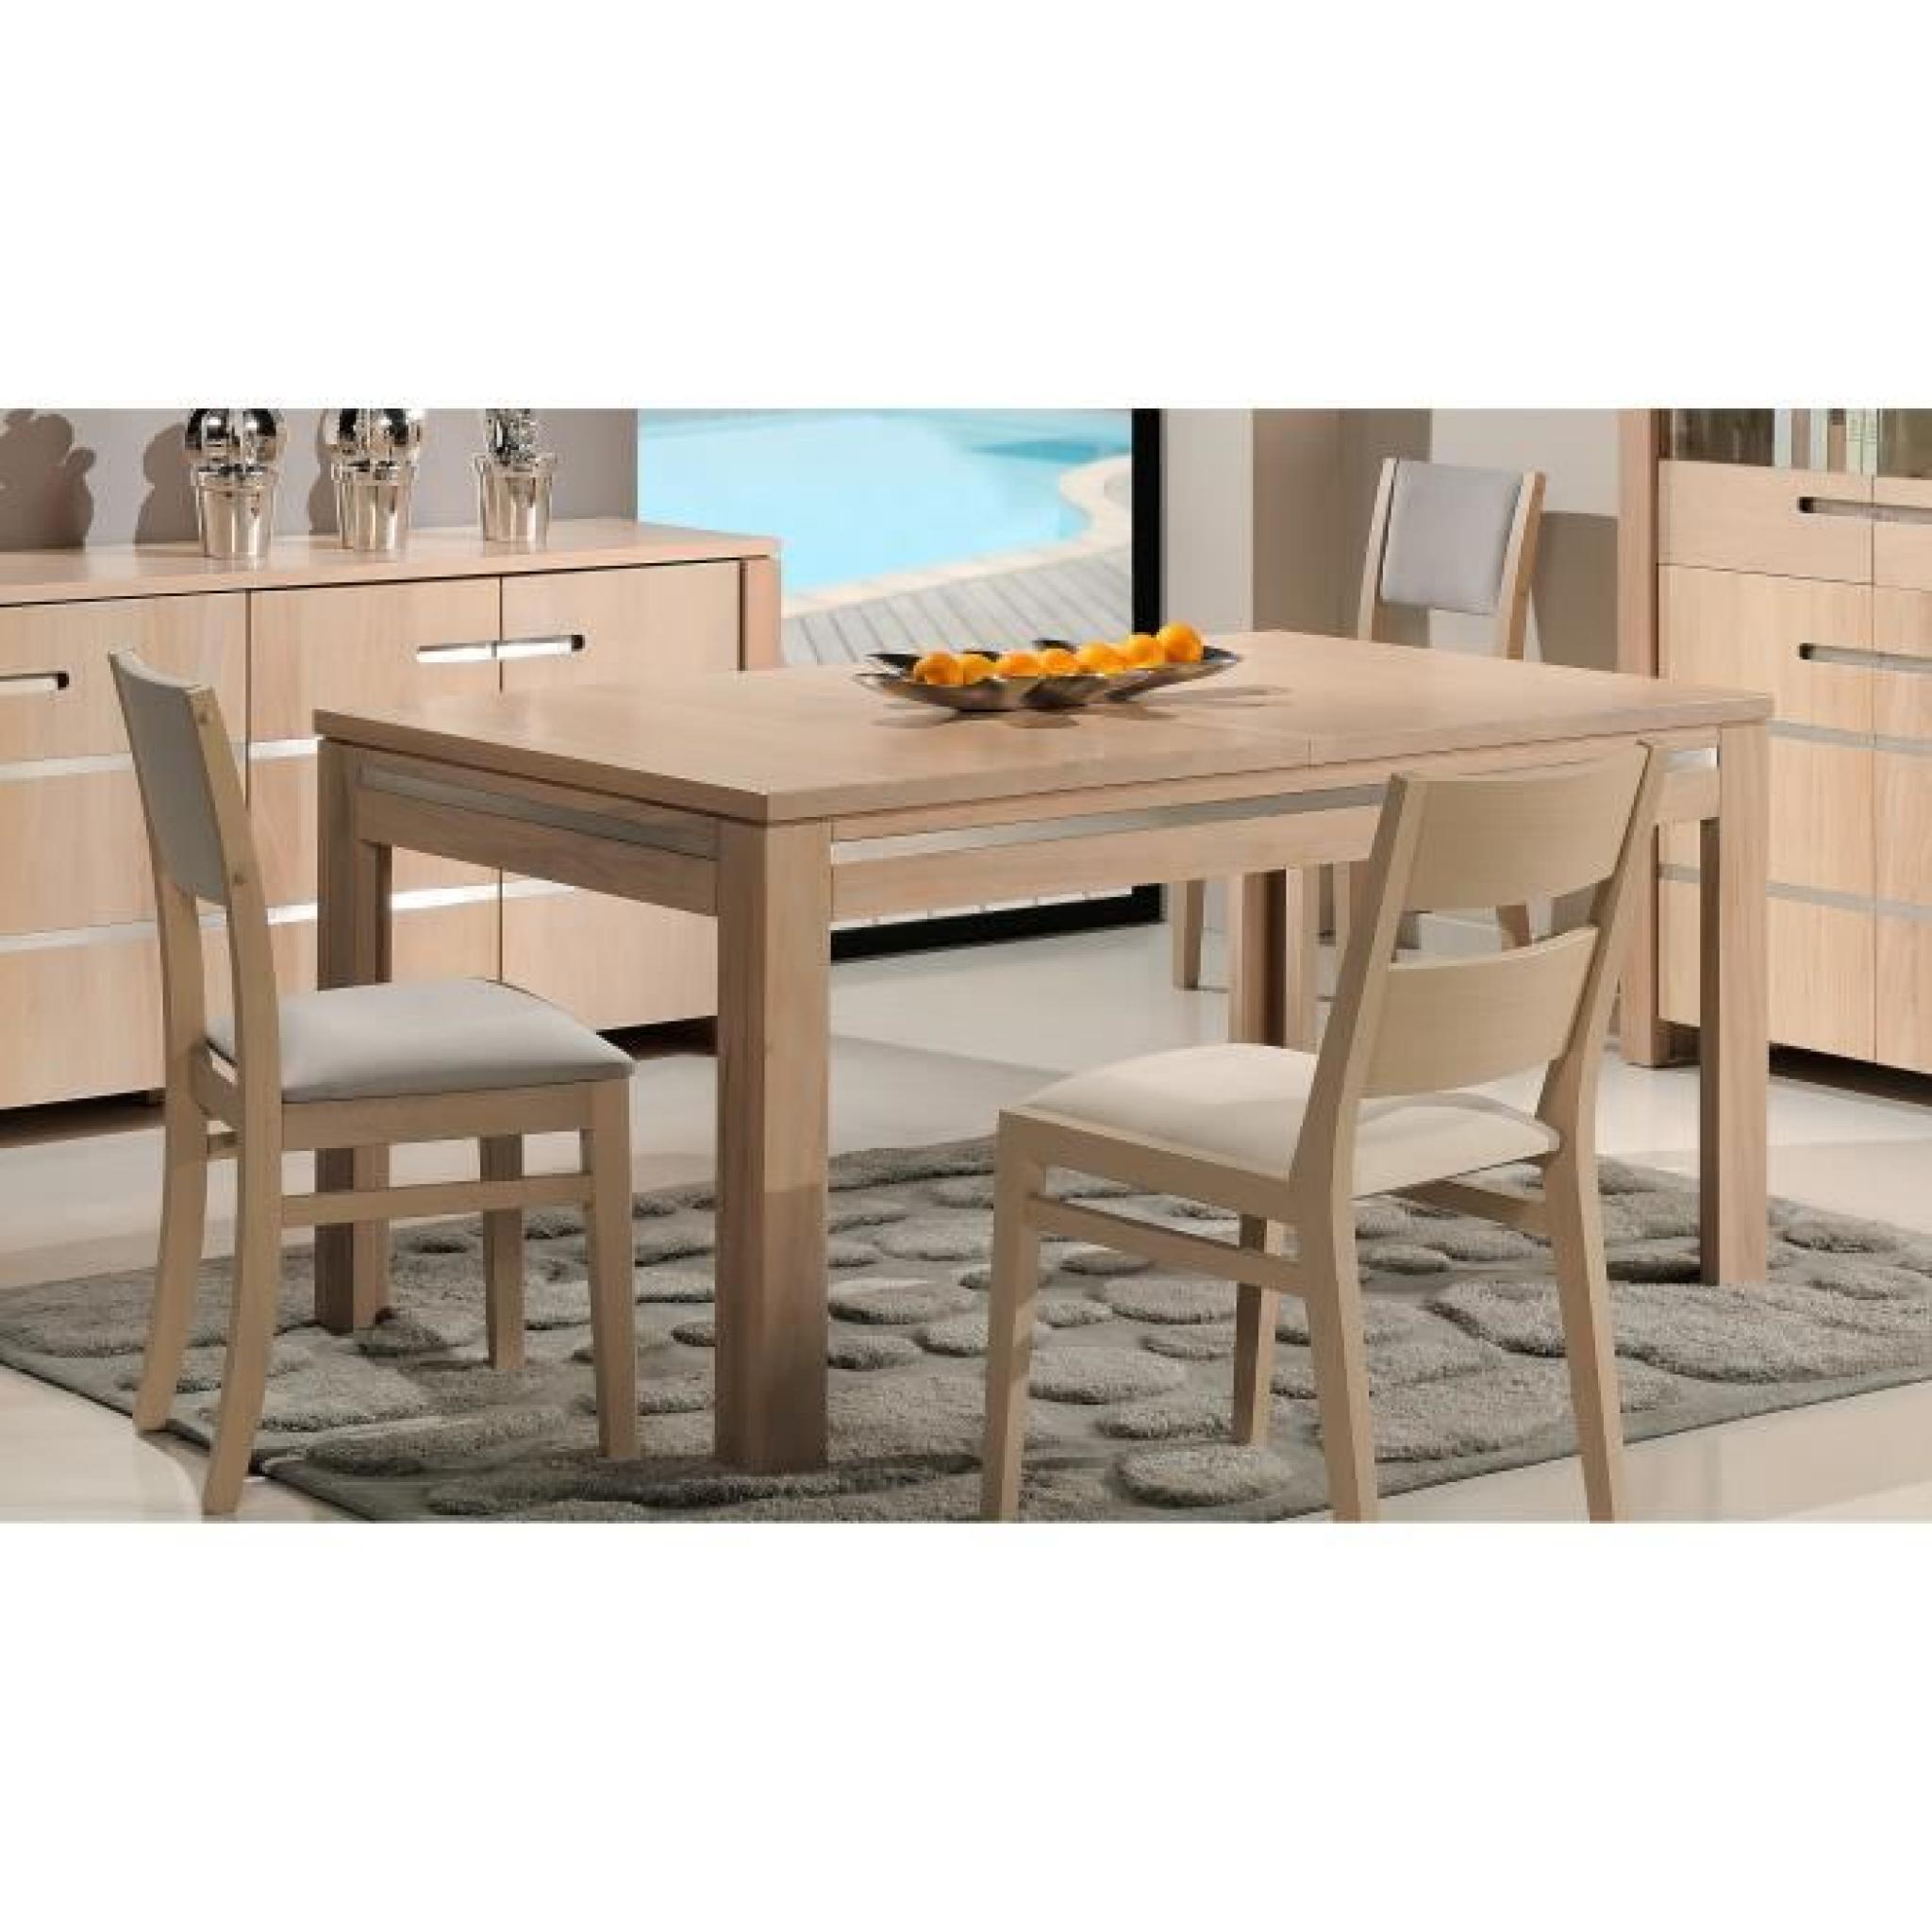 Table OPALE 160/95 ORME MASSIF-INOX (Orme - Naturel)